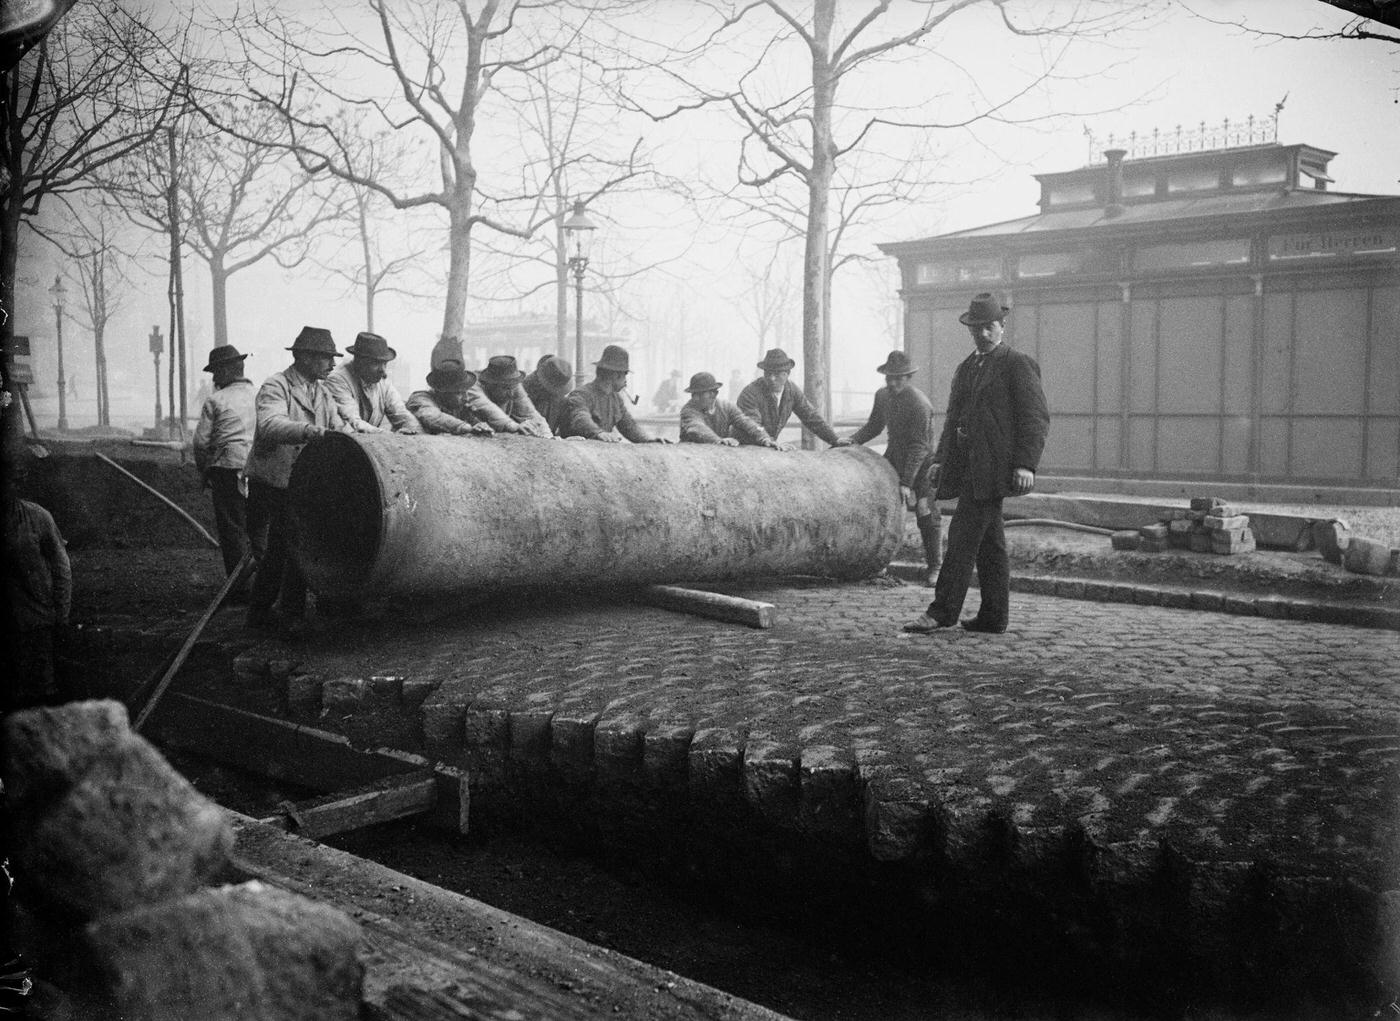 Man piping a sewer pipe, Vienna, 1900s